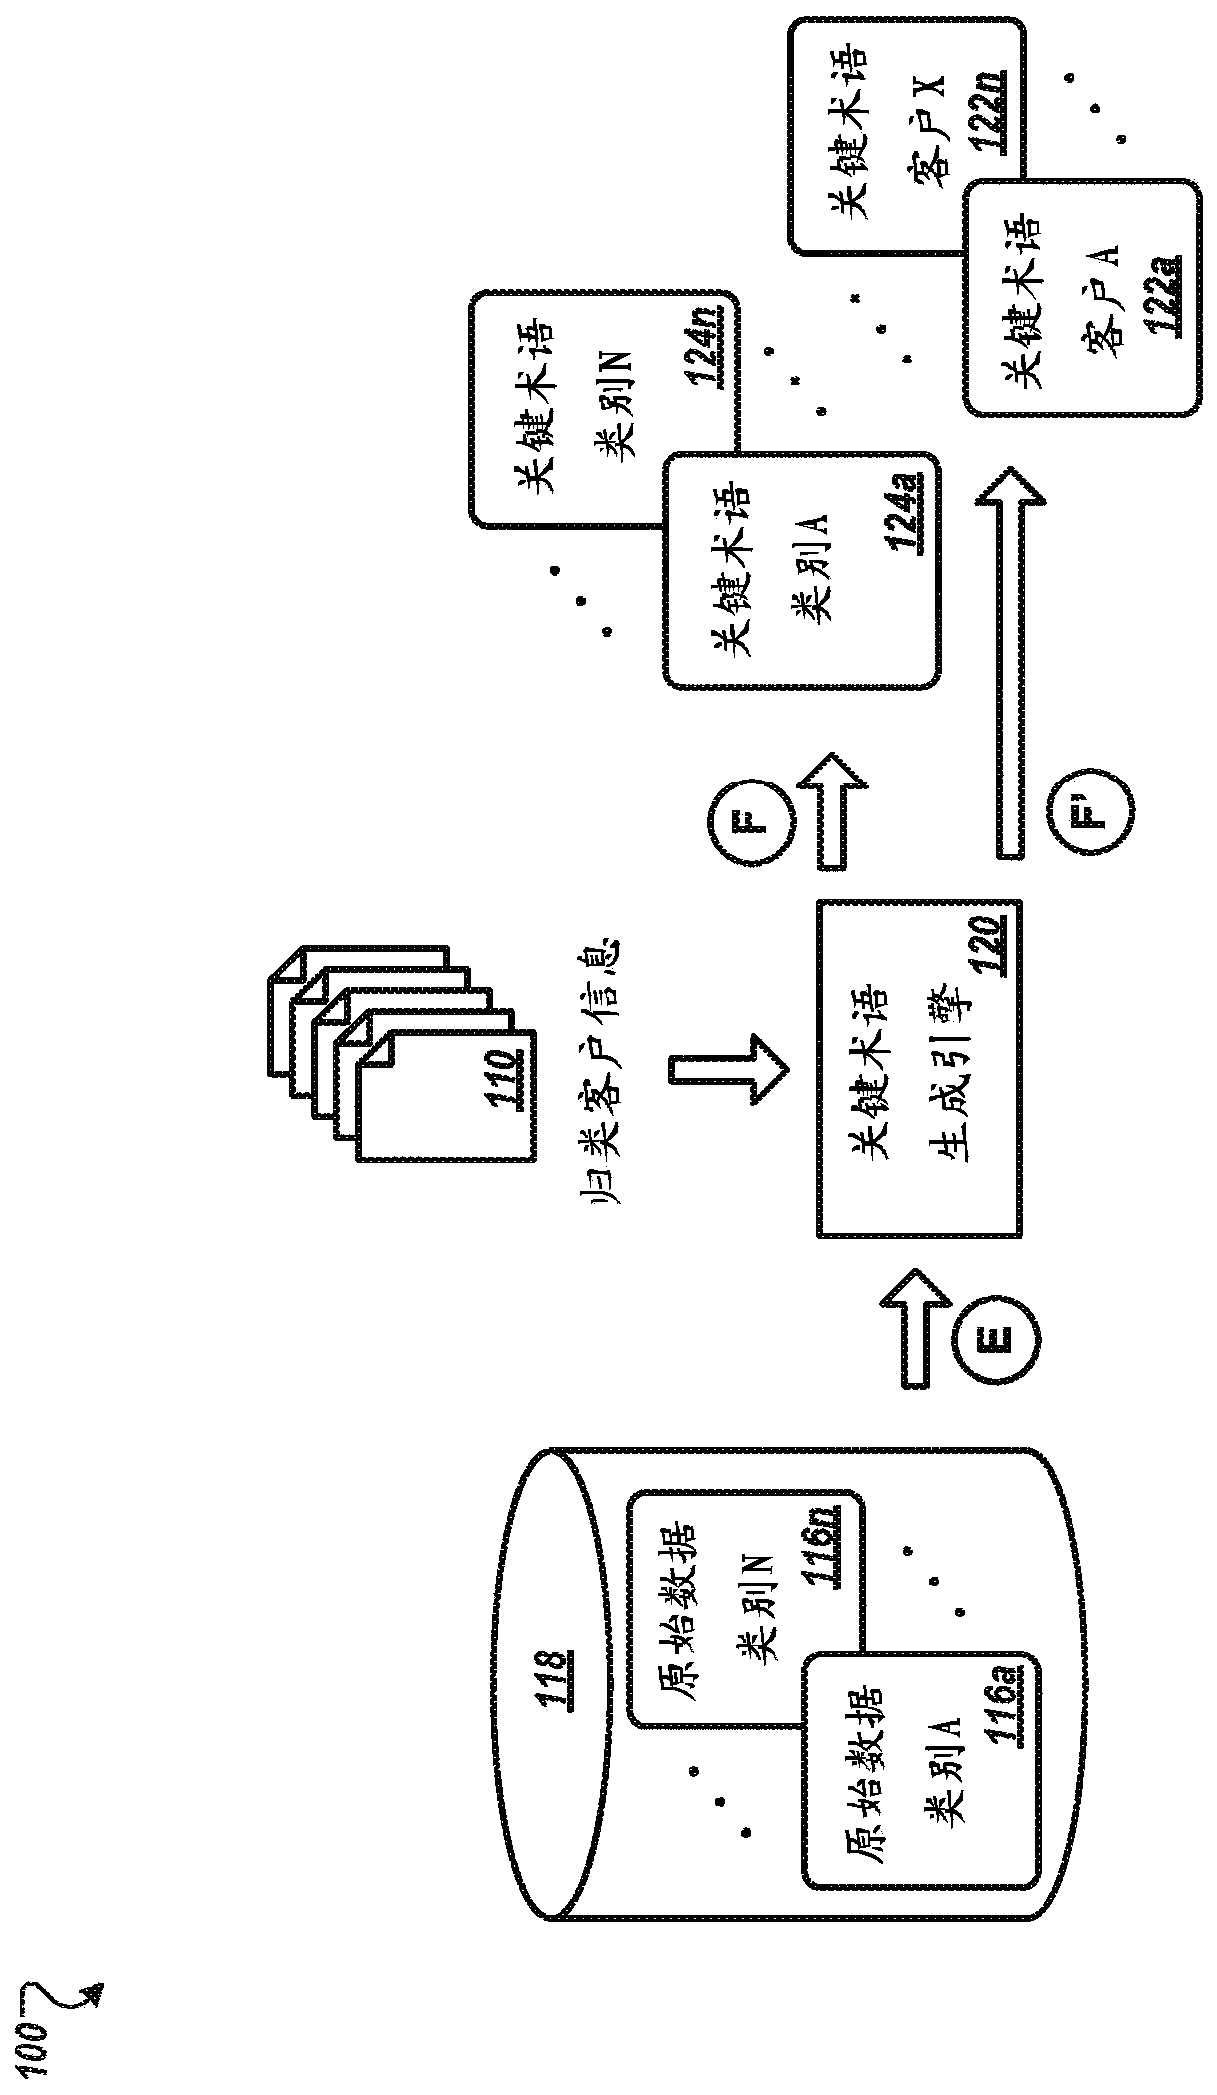 Systems and methods for intelligent prospect identification using online resources and neural network processing to classify organizations based on published materials